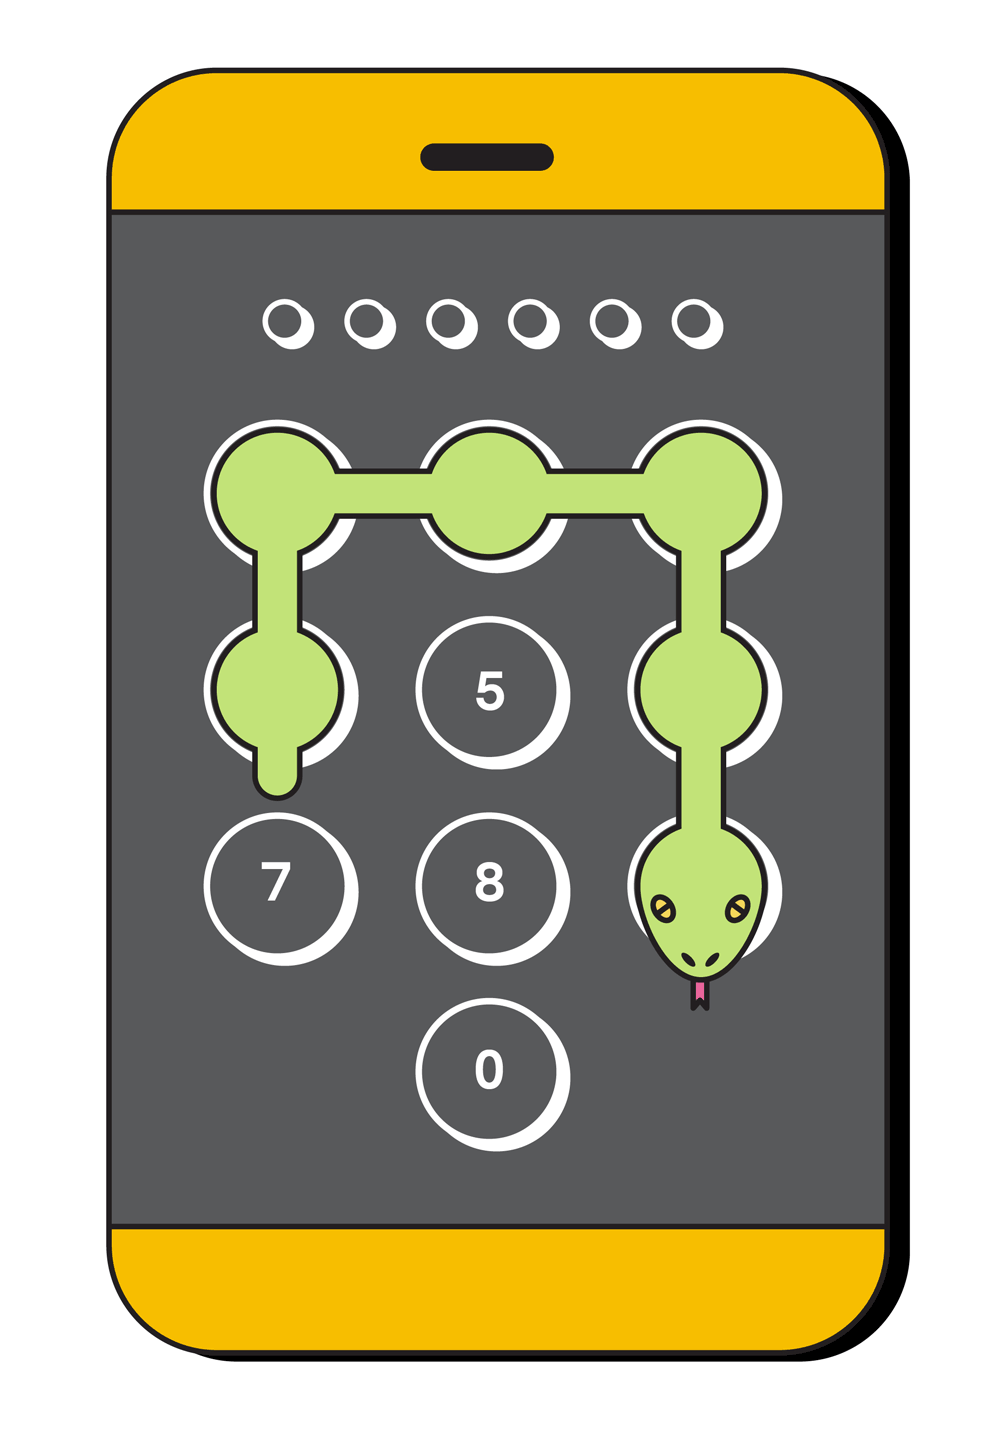 Animated spot illustration of snake slithering on the buttons of a passcode on a smartphone